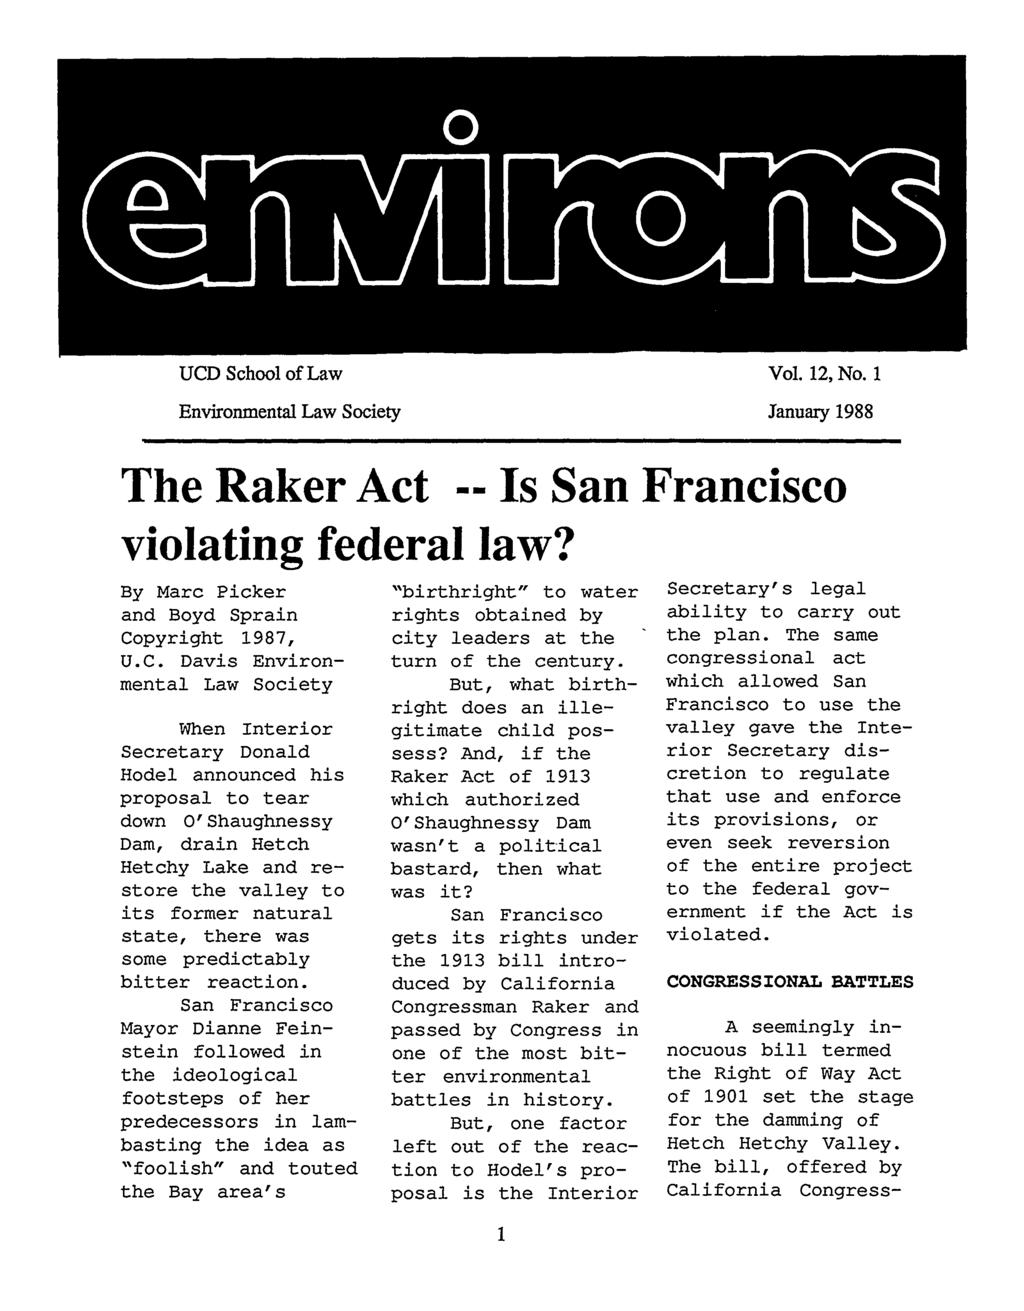 UCD School of Law Vol. 12, No. 1 Environmental Law Society January 1988 The Raker Act -- Is violating federal law? By Marc Picker and Boyd Sprain Copyright 1987, U.C. Davis Environmental Law Society